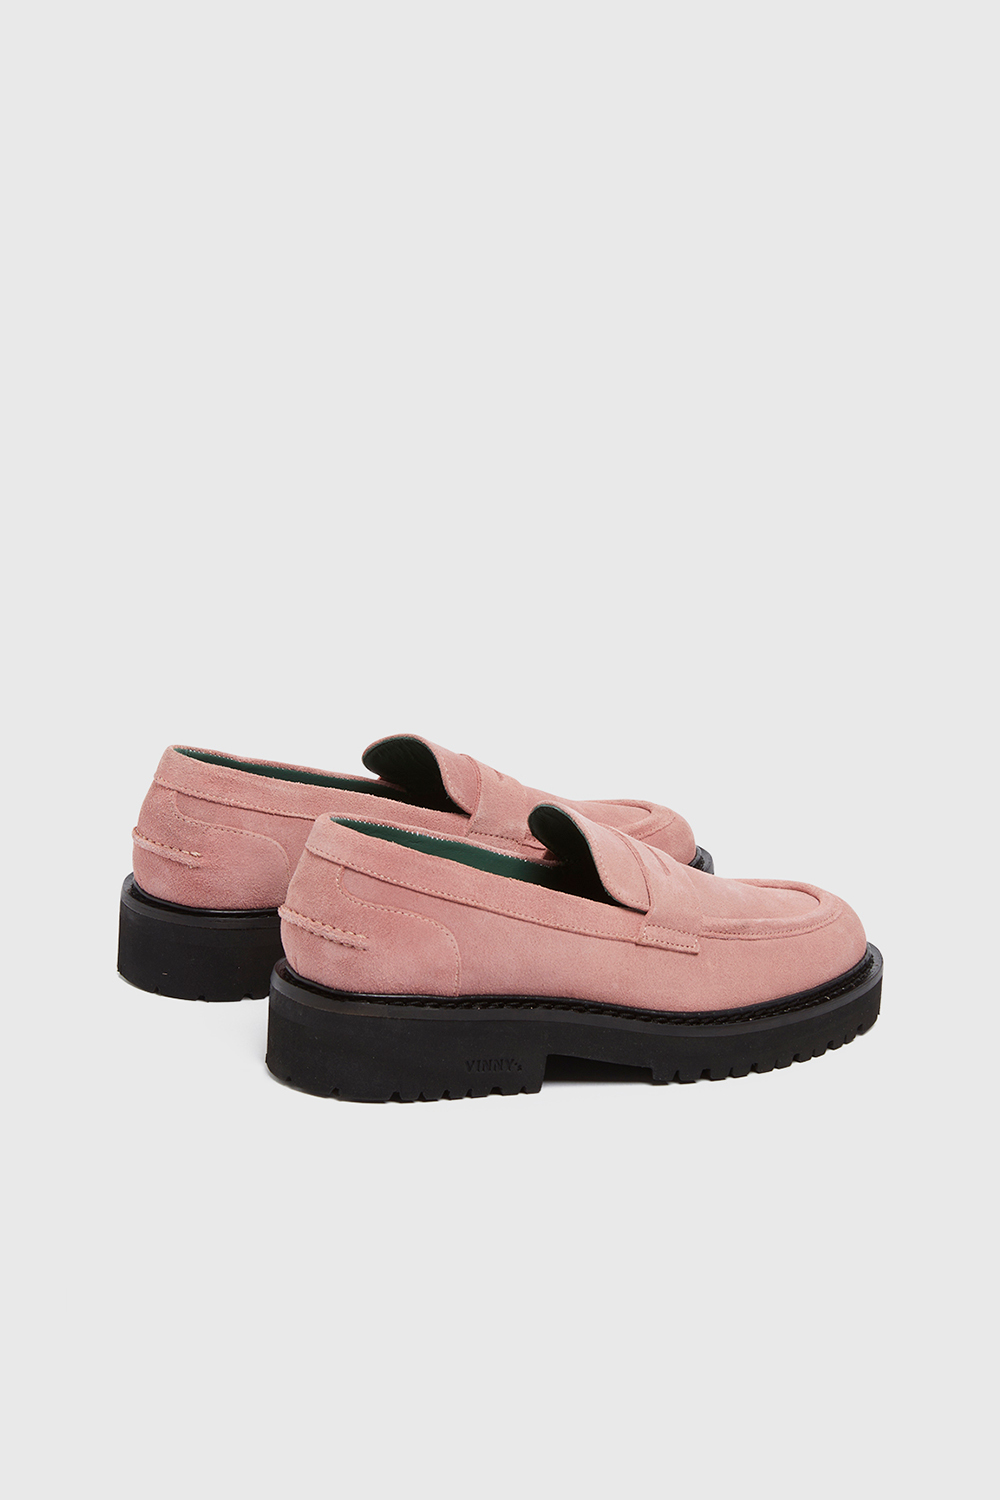 Vinny's Wood Wood x Richee Penny Loafer Pink suede | WoodWood.com